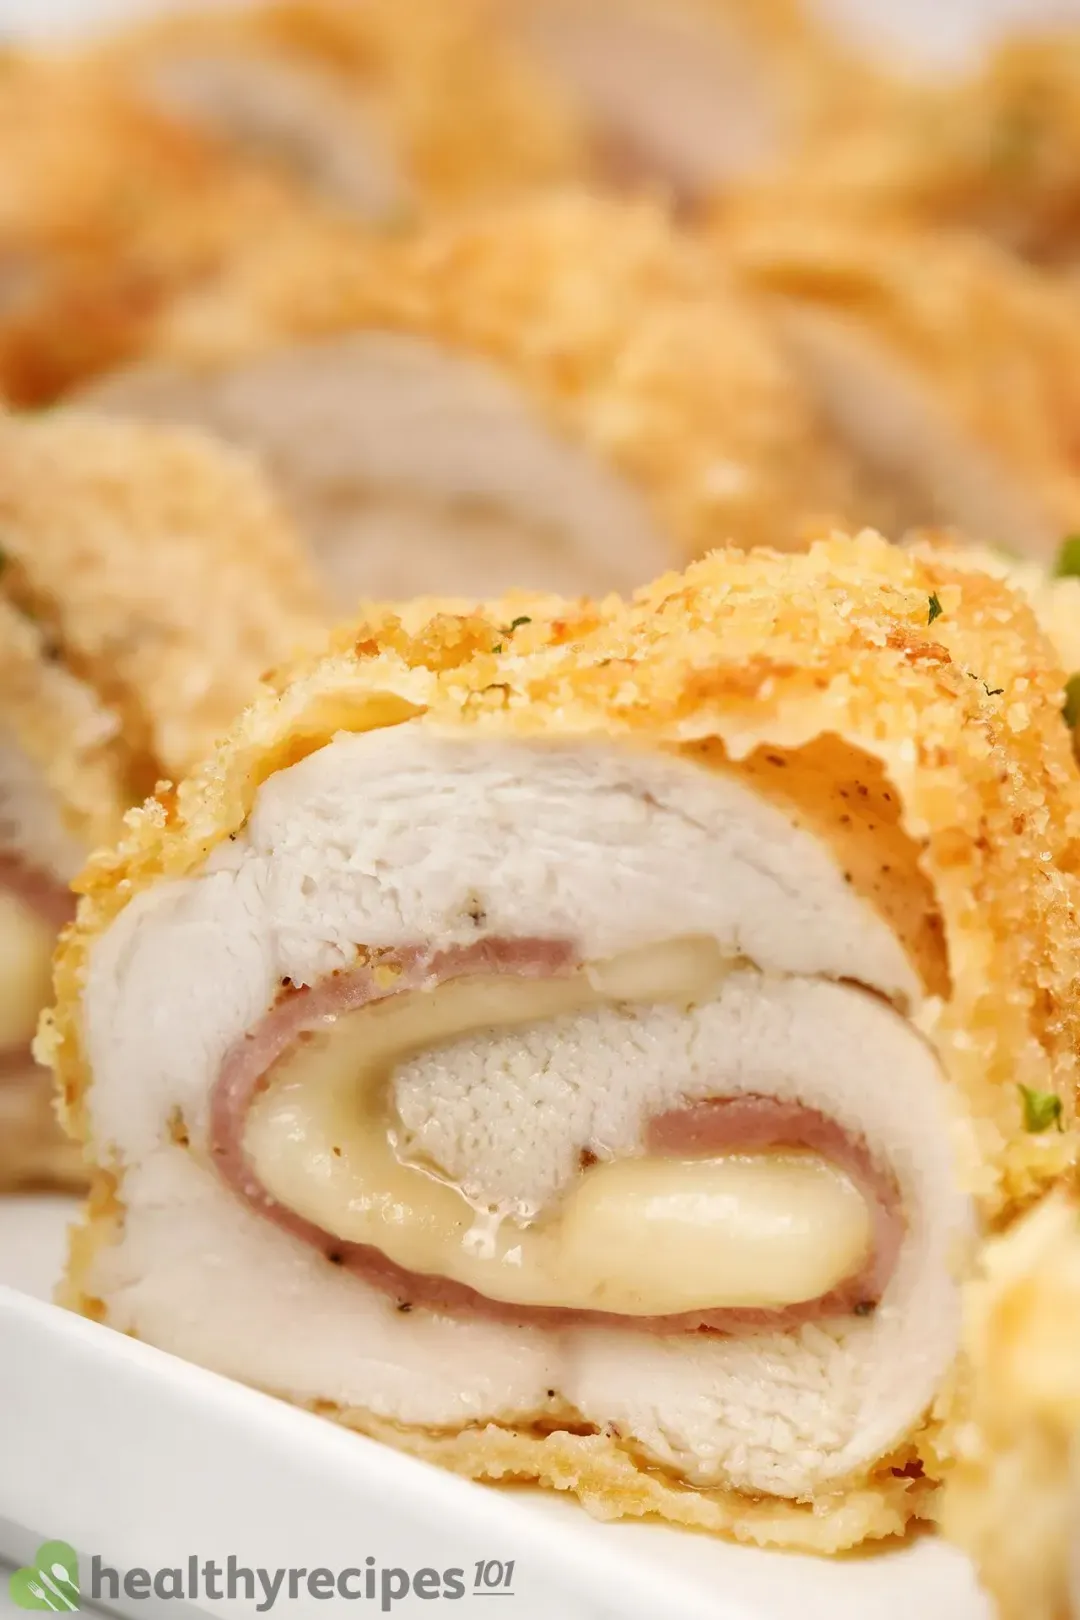 Slices of chicken cordon bleu rolled up with ham and cheese, coated in crispy breading